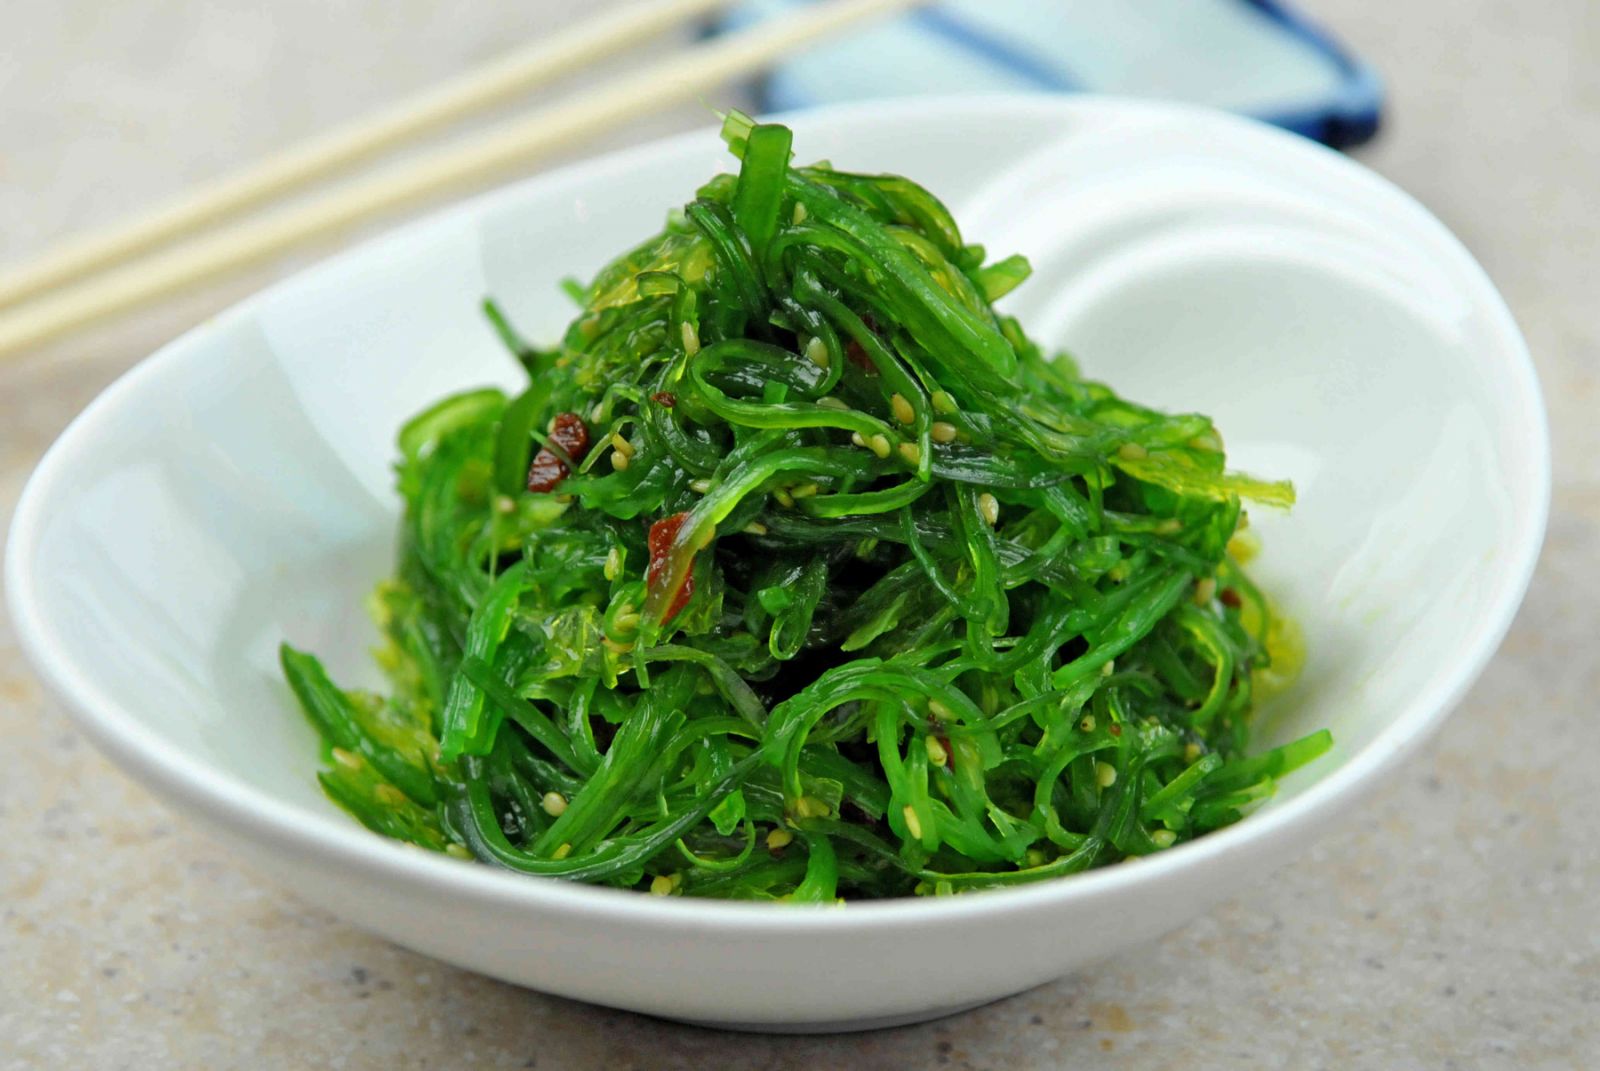 Let’s add seaweed to our daily diet